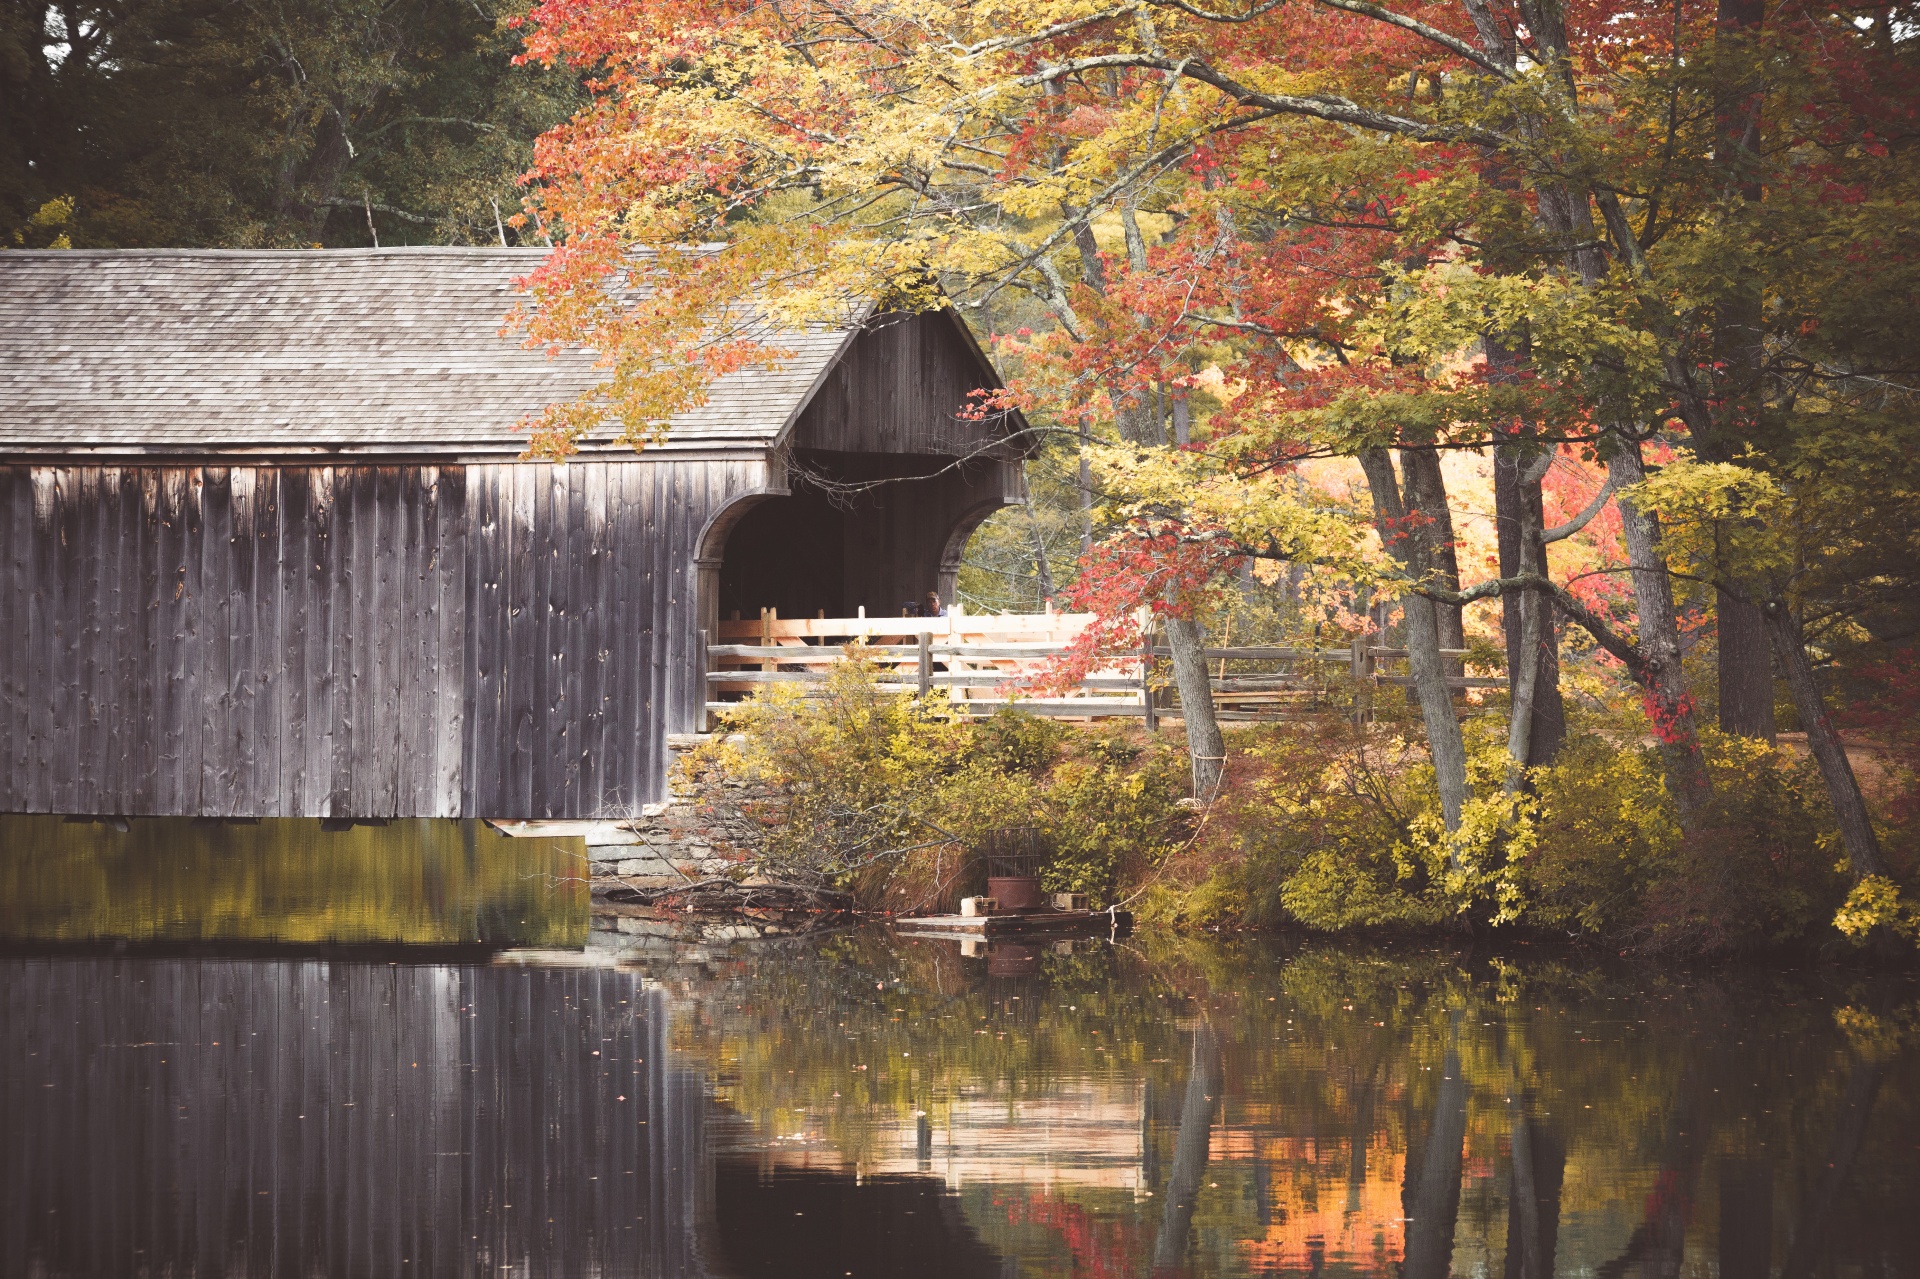 Old wooden covered bridge with the pond reflection in autumn